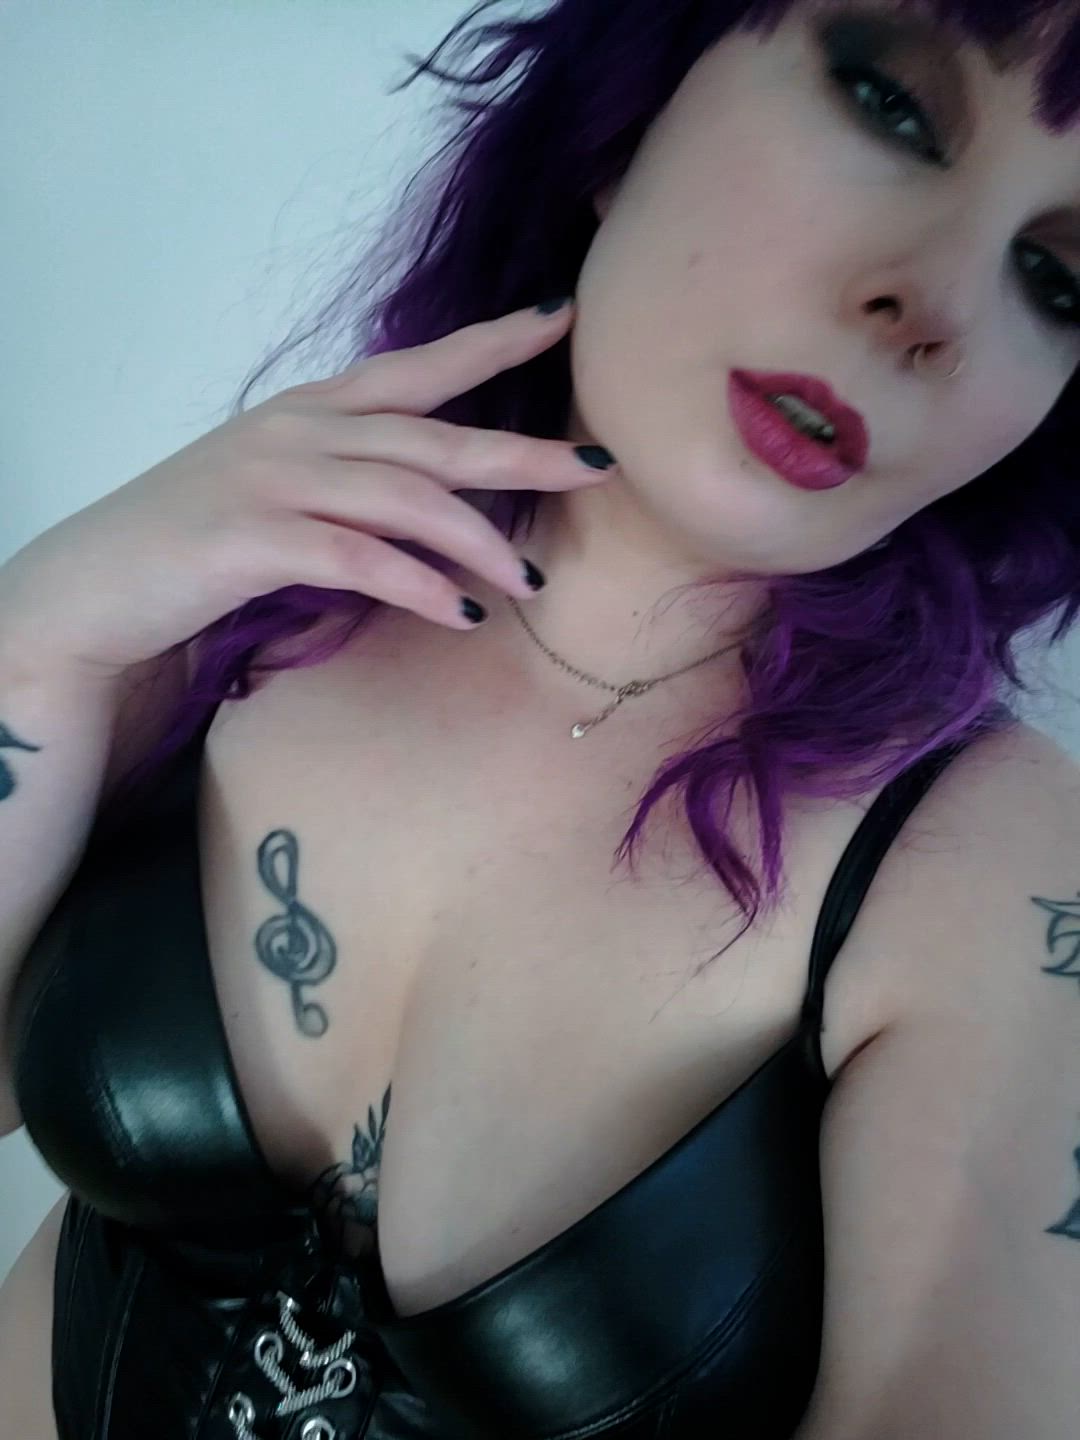 Tits porn video with onlyfans model vienokaisla <strong>@vieno.kaisla</strong>